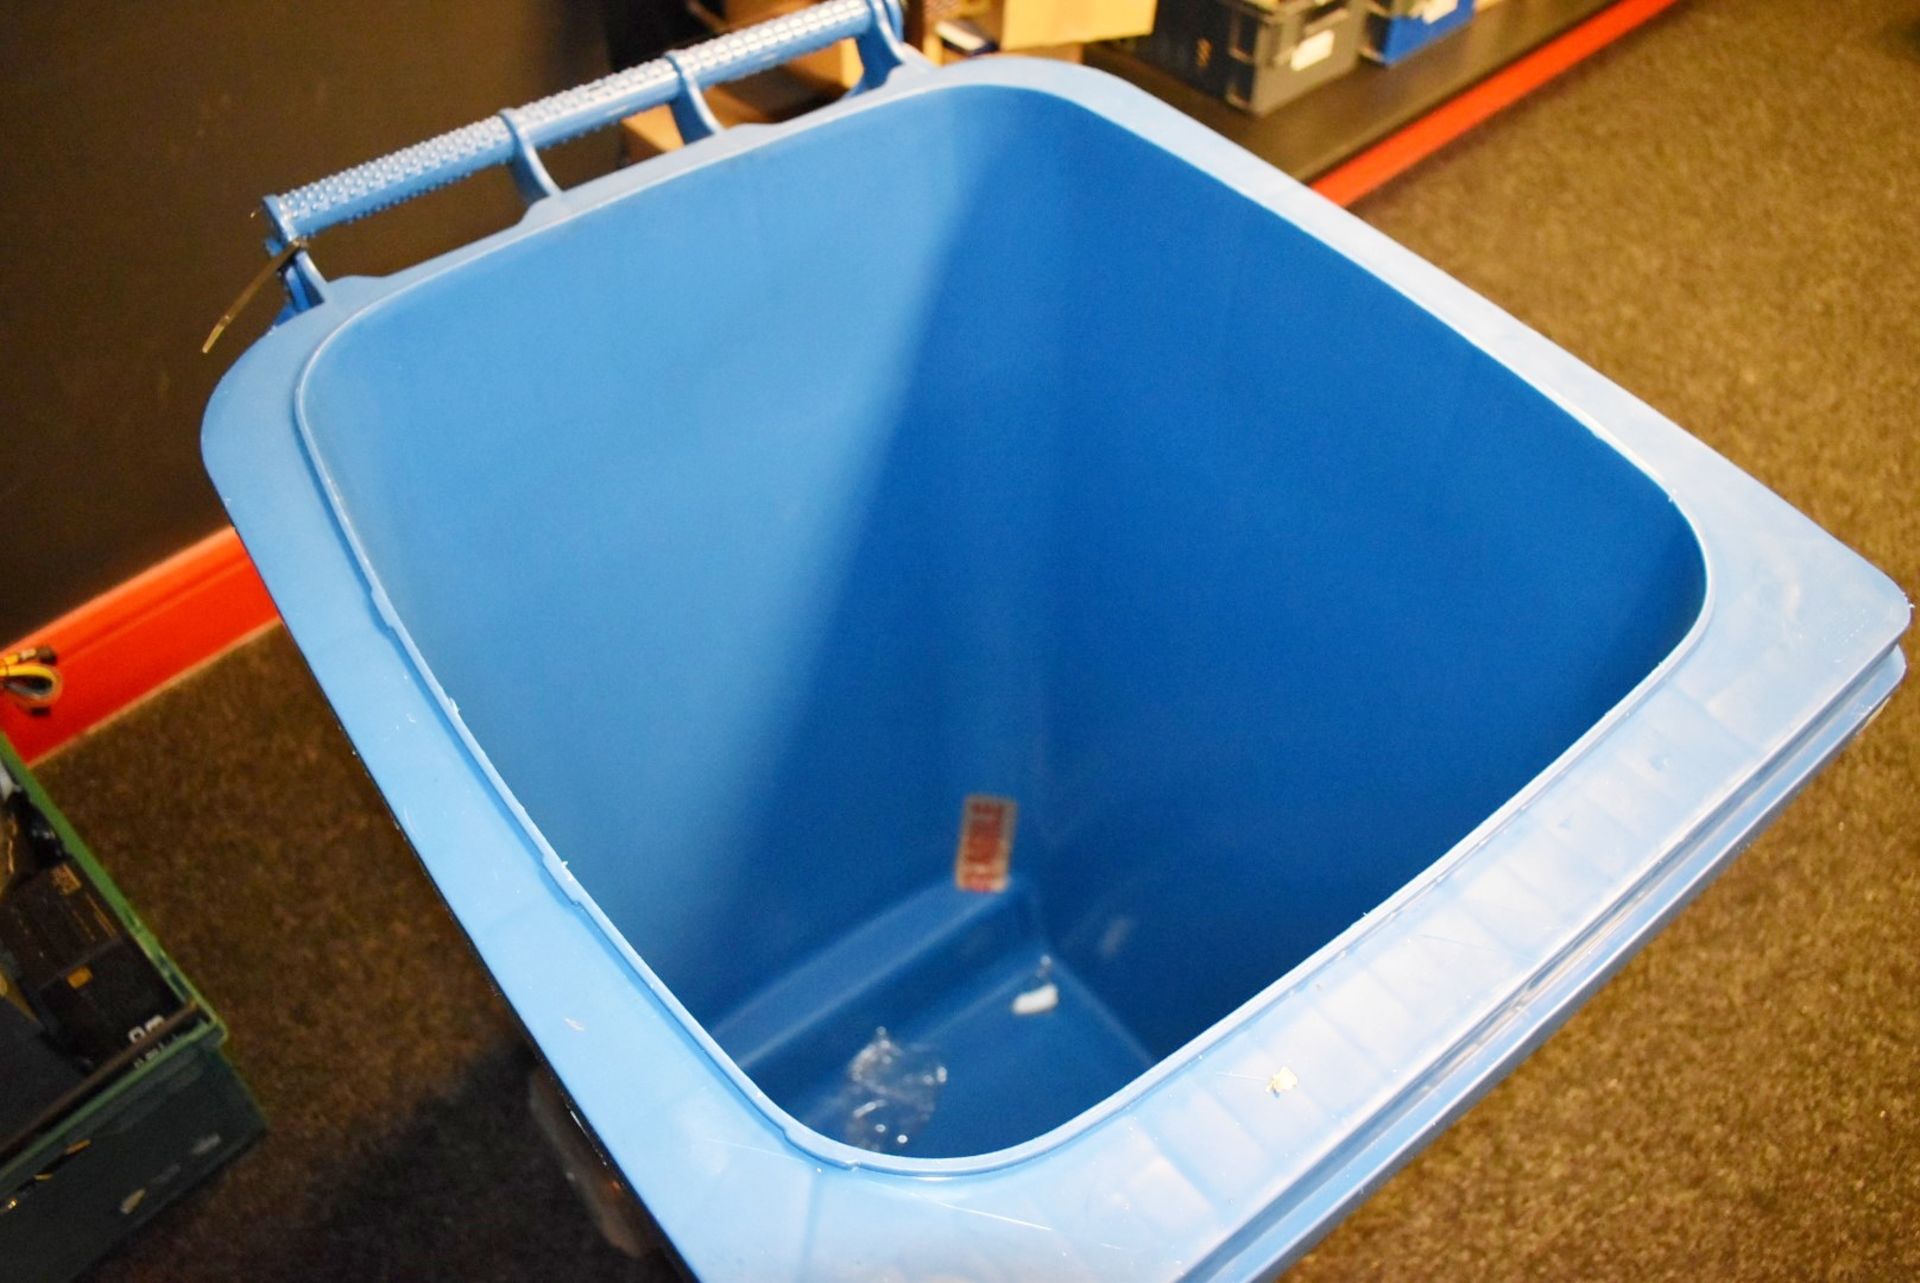 1 x Wheelie Waste Bin in Blue - 240 Litre - Previously Used Indoors Only - Good Clean Condition - Image 3 of 3